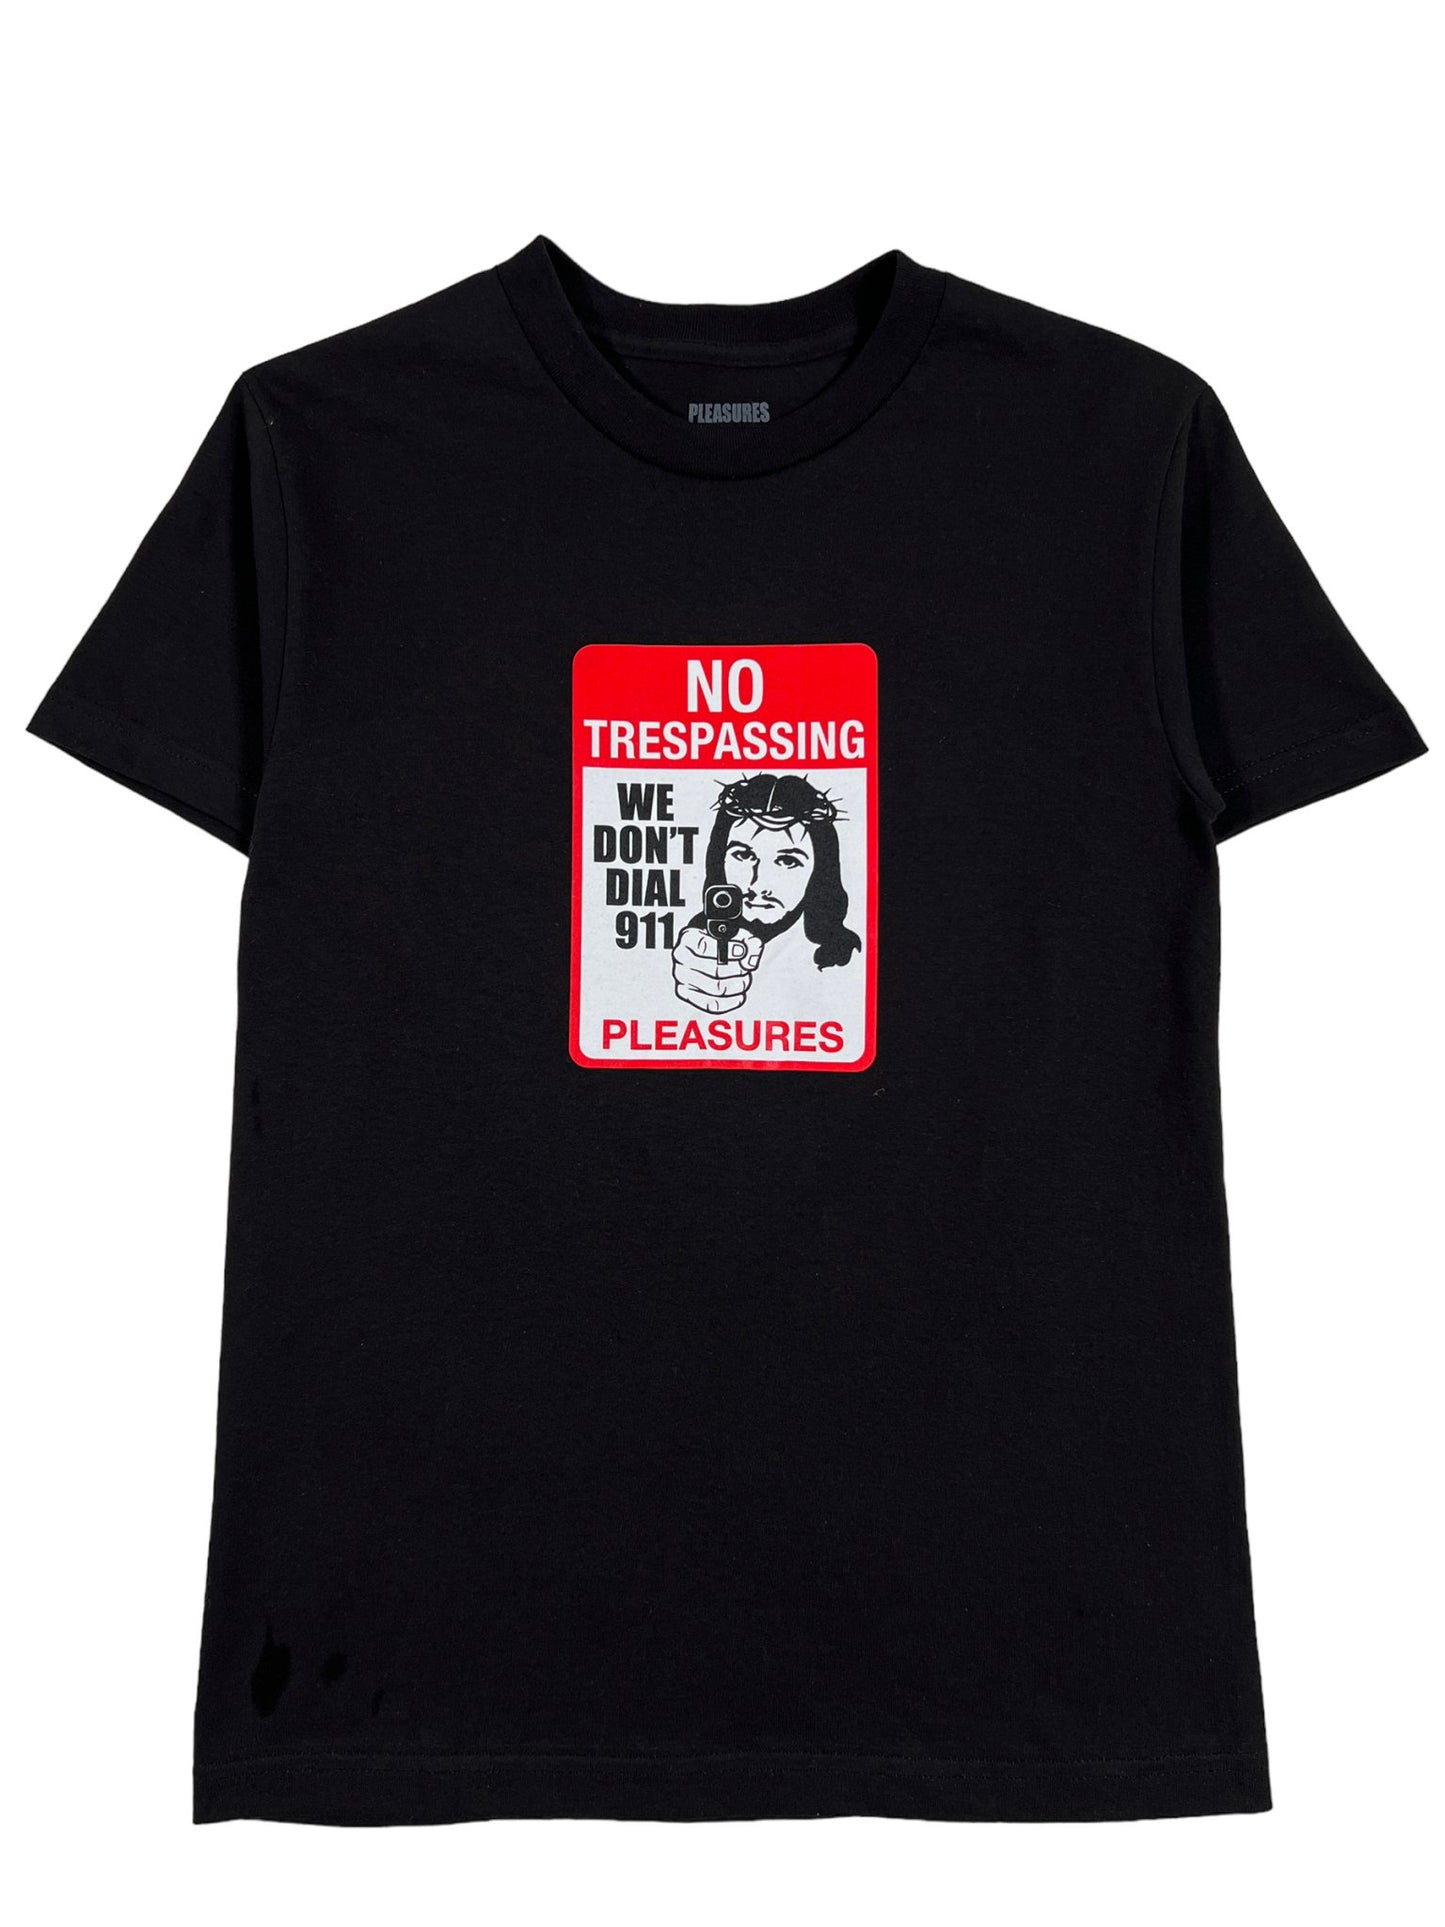 A black graphic t-shirt with a no trespassing sign on it from PLEASURES TRESPASS T-SHIRT BLK by PLEASURES.